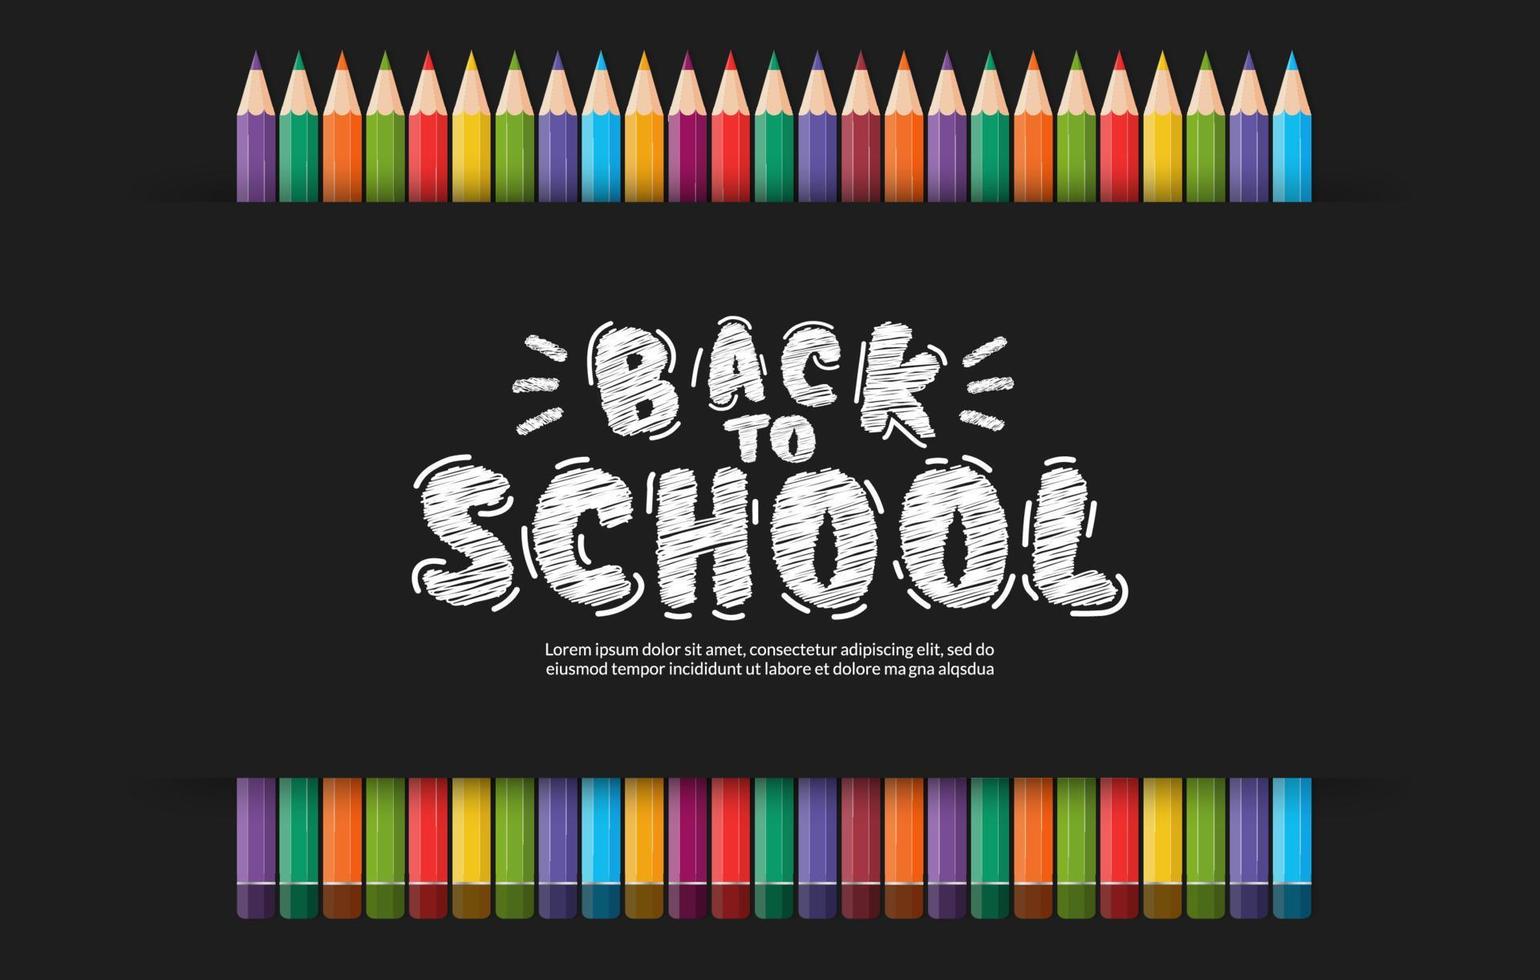 Color pencils vector design background, Back to school concept with colorful crayons banner